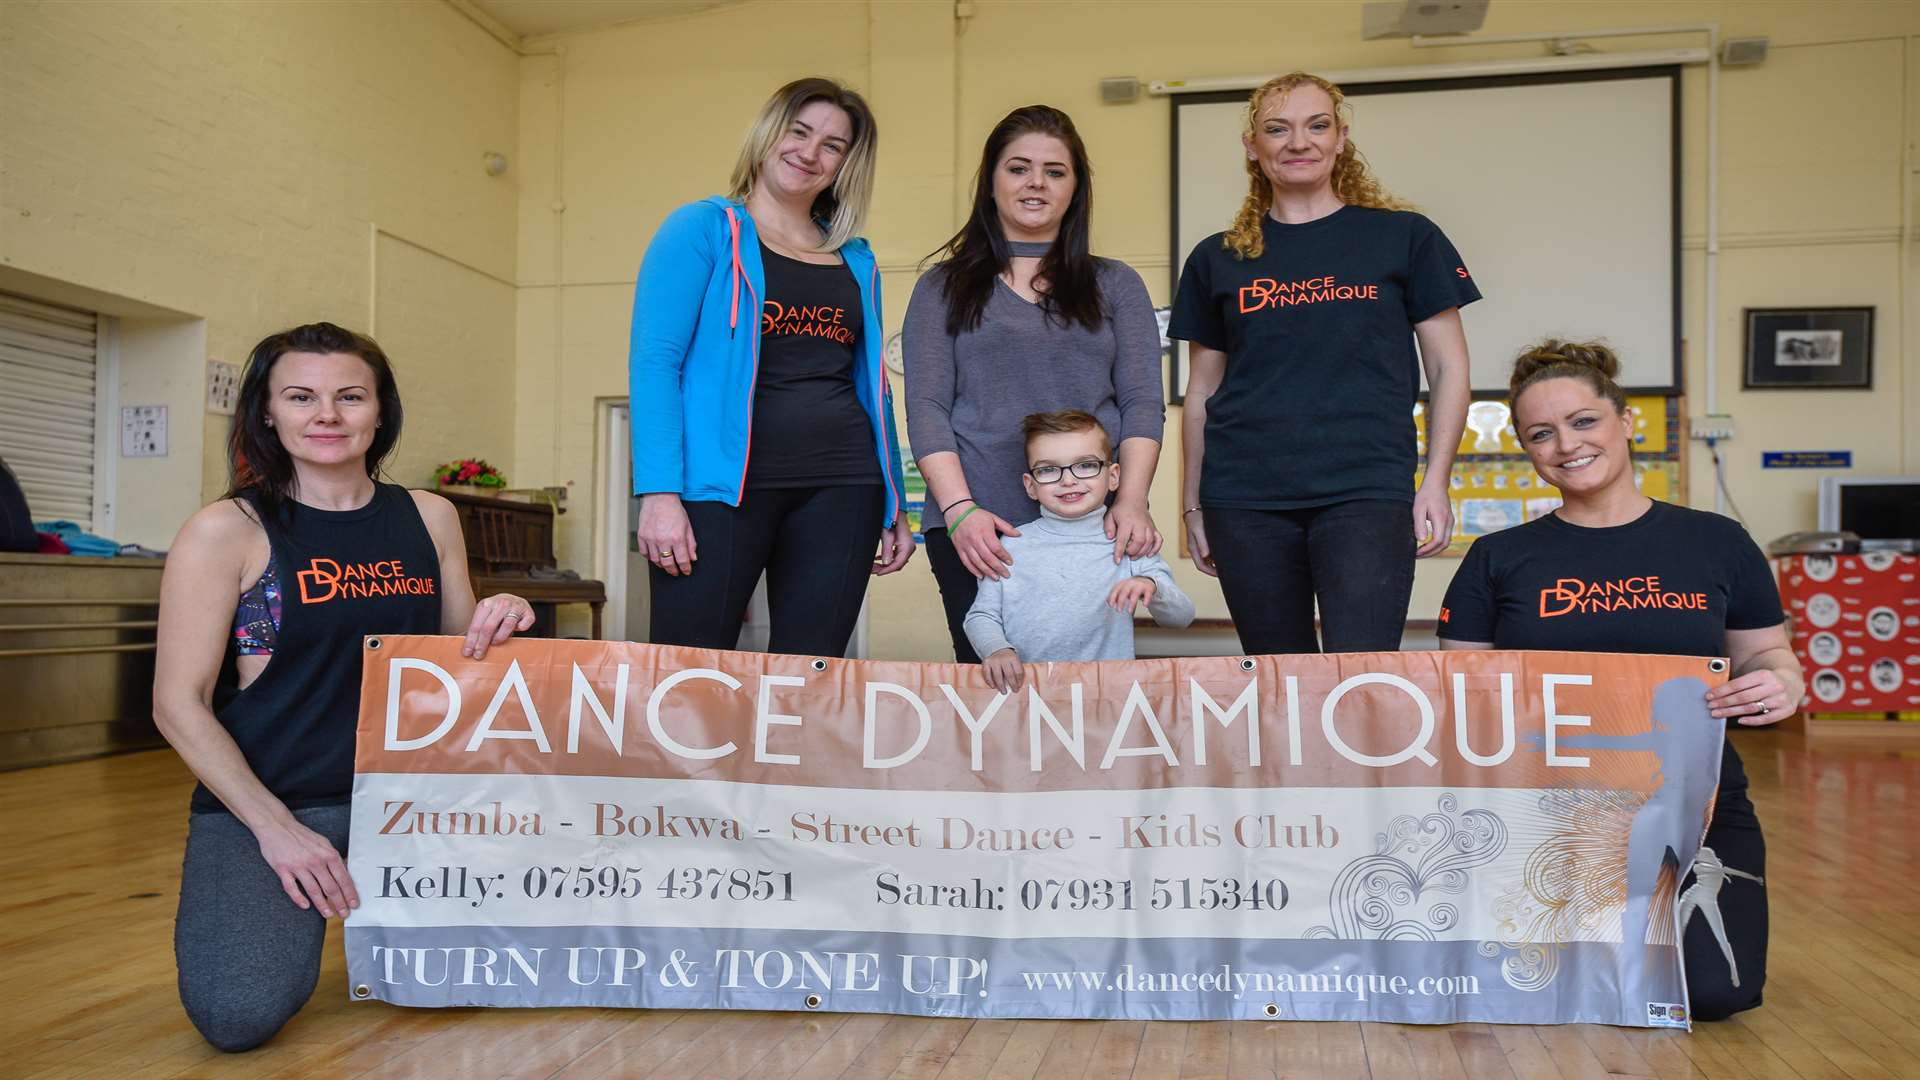 Sophie Morrish, Kelly Woodward, Naomi Morton, Theo Knott, Sarah Maynard and Emma Fay. Dance Dynamique is holding a fundraising performance for Theo's Mission to Walk